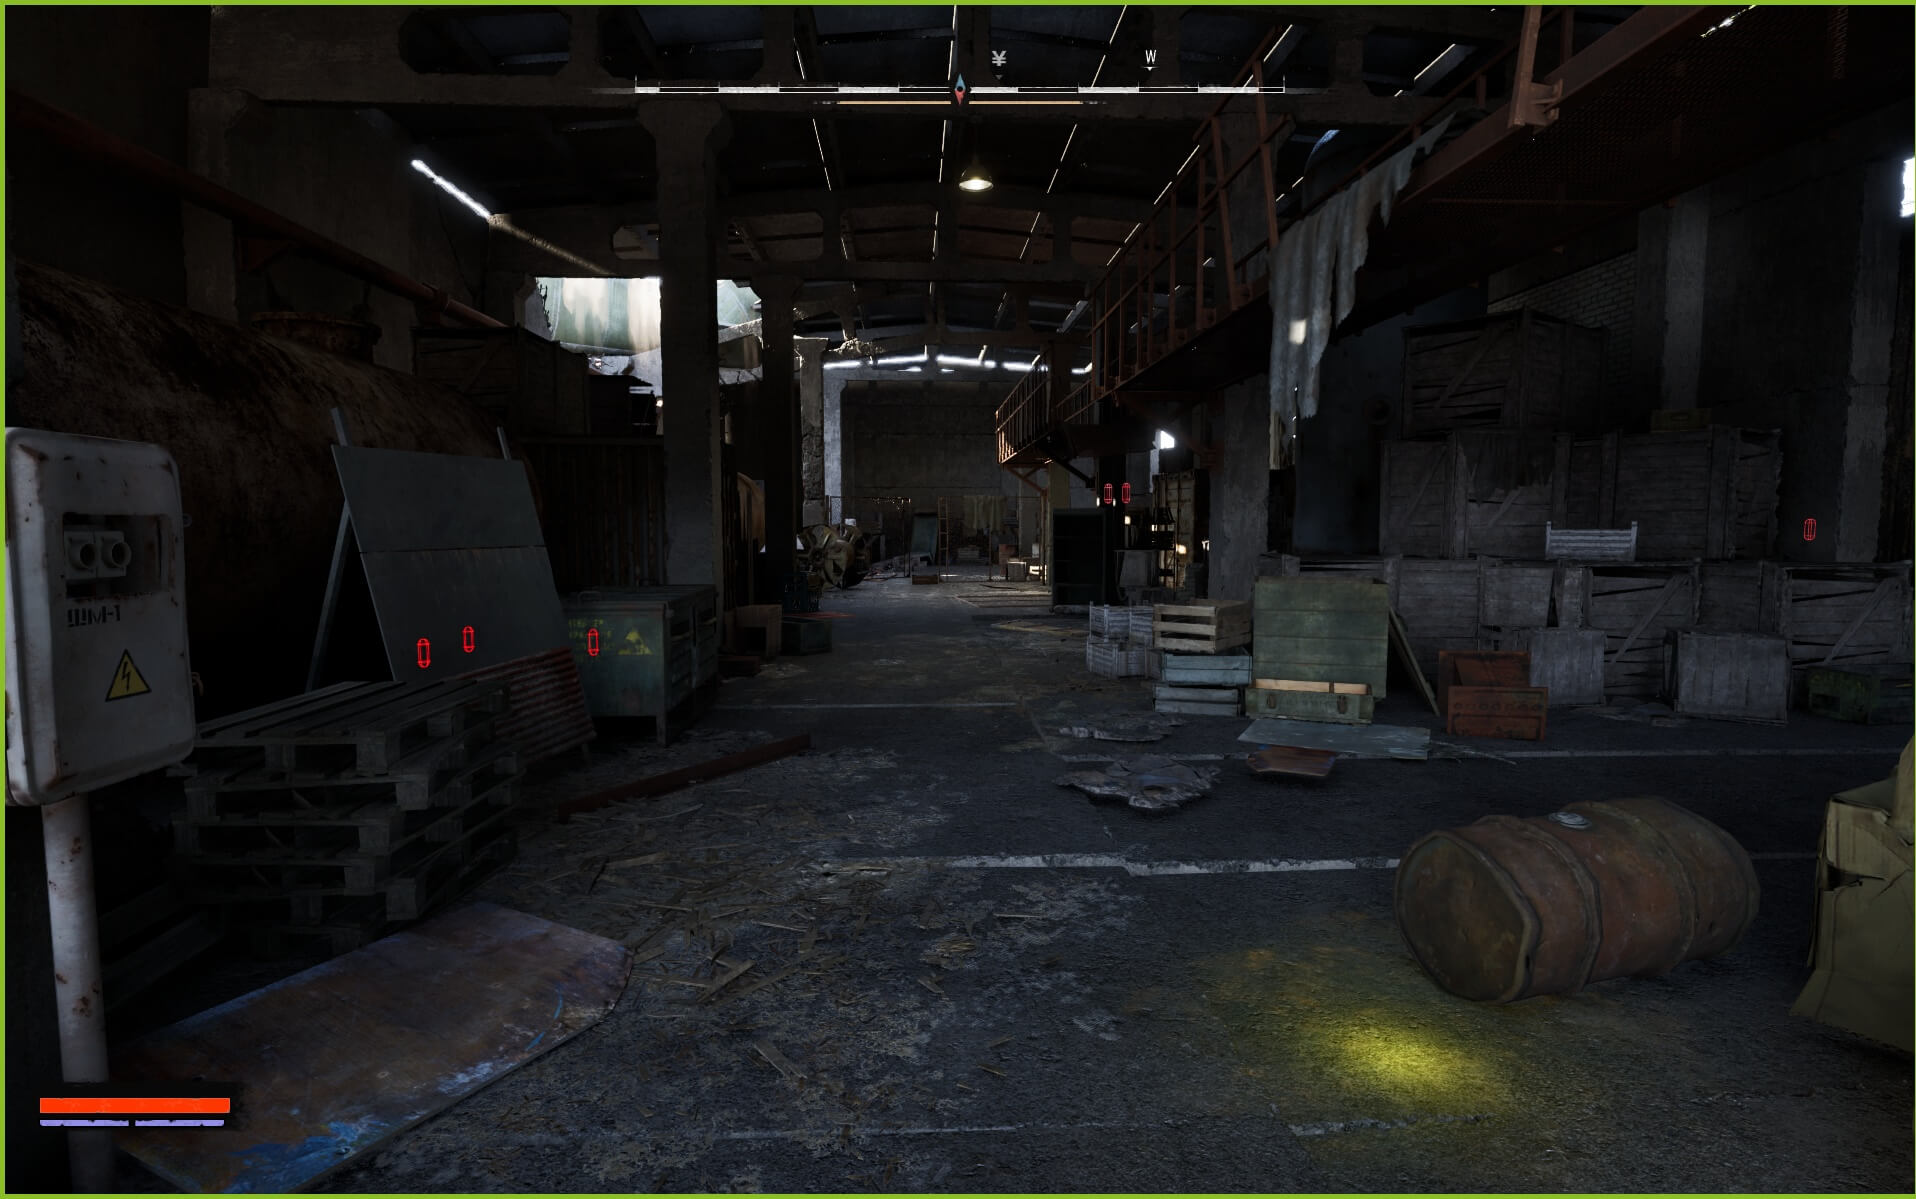 Fresh screenshots of S.T.A.L.K.E.R. 2 have been released. Gaming